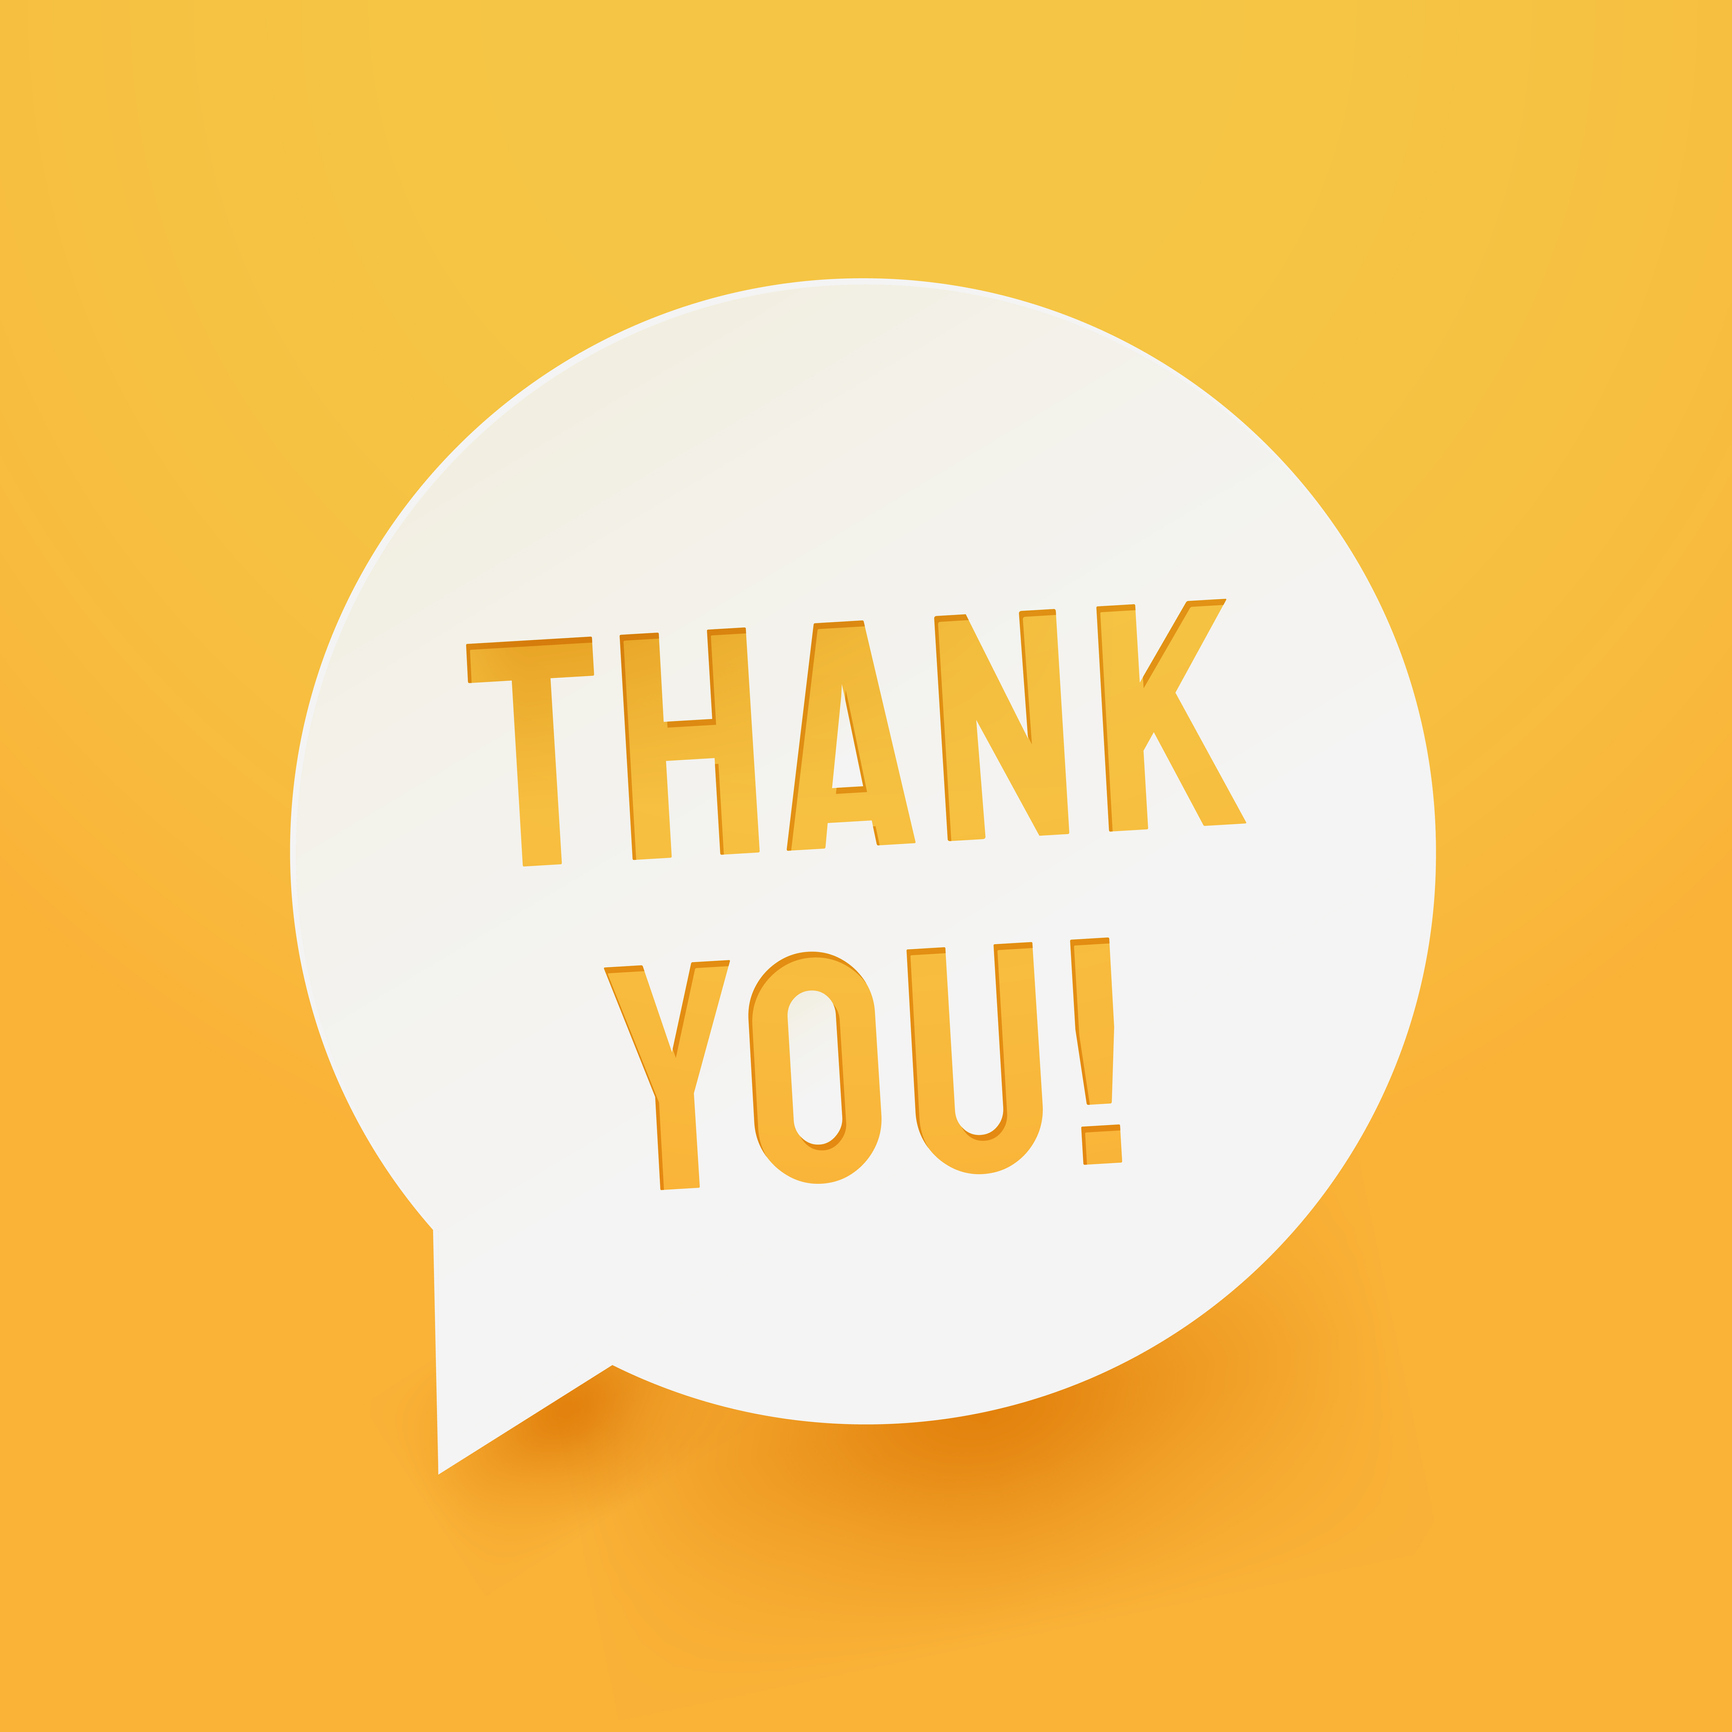 Stock Graphic Yellow Square with Talking Bubble Inside With the Words Thank You